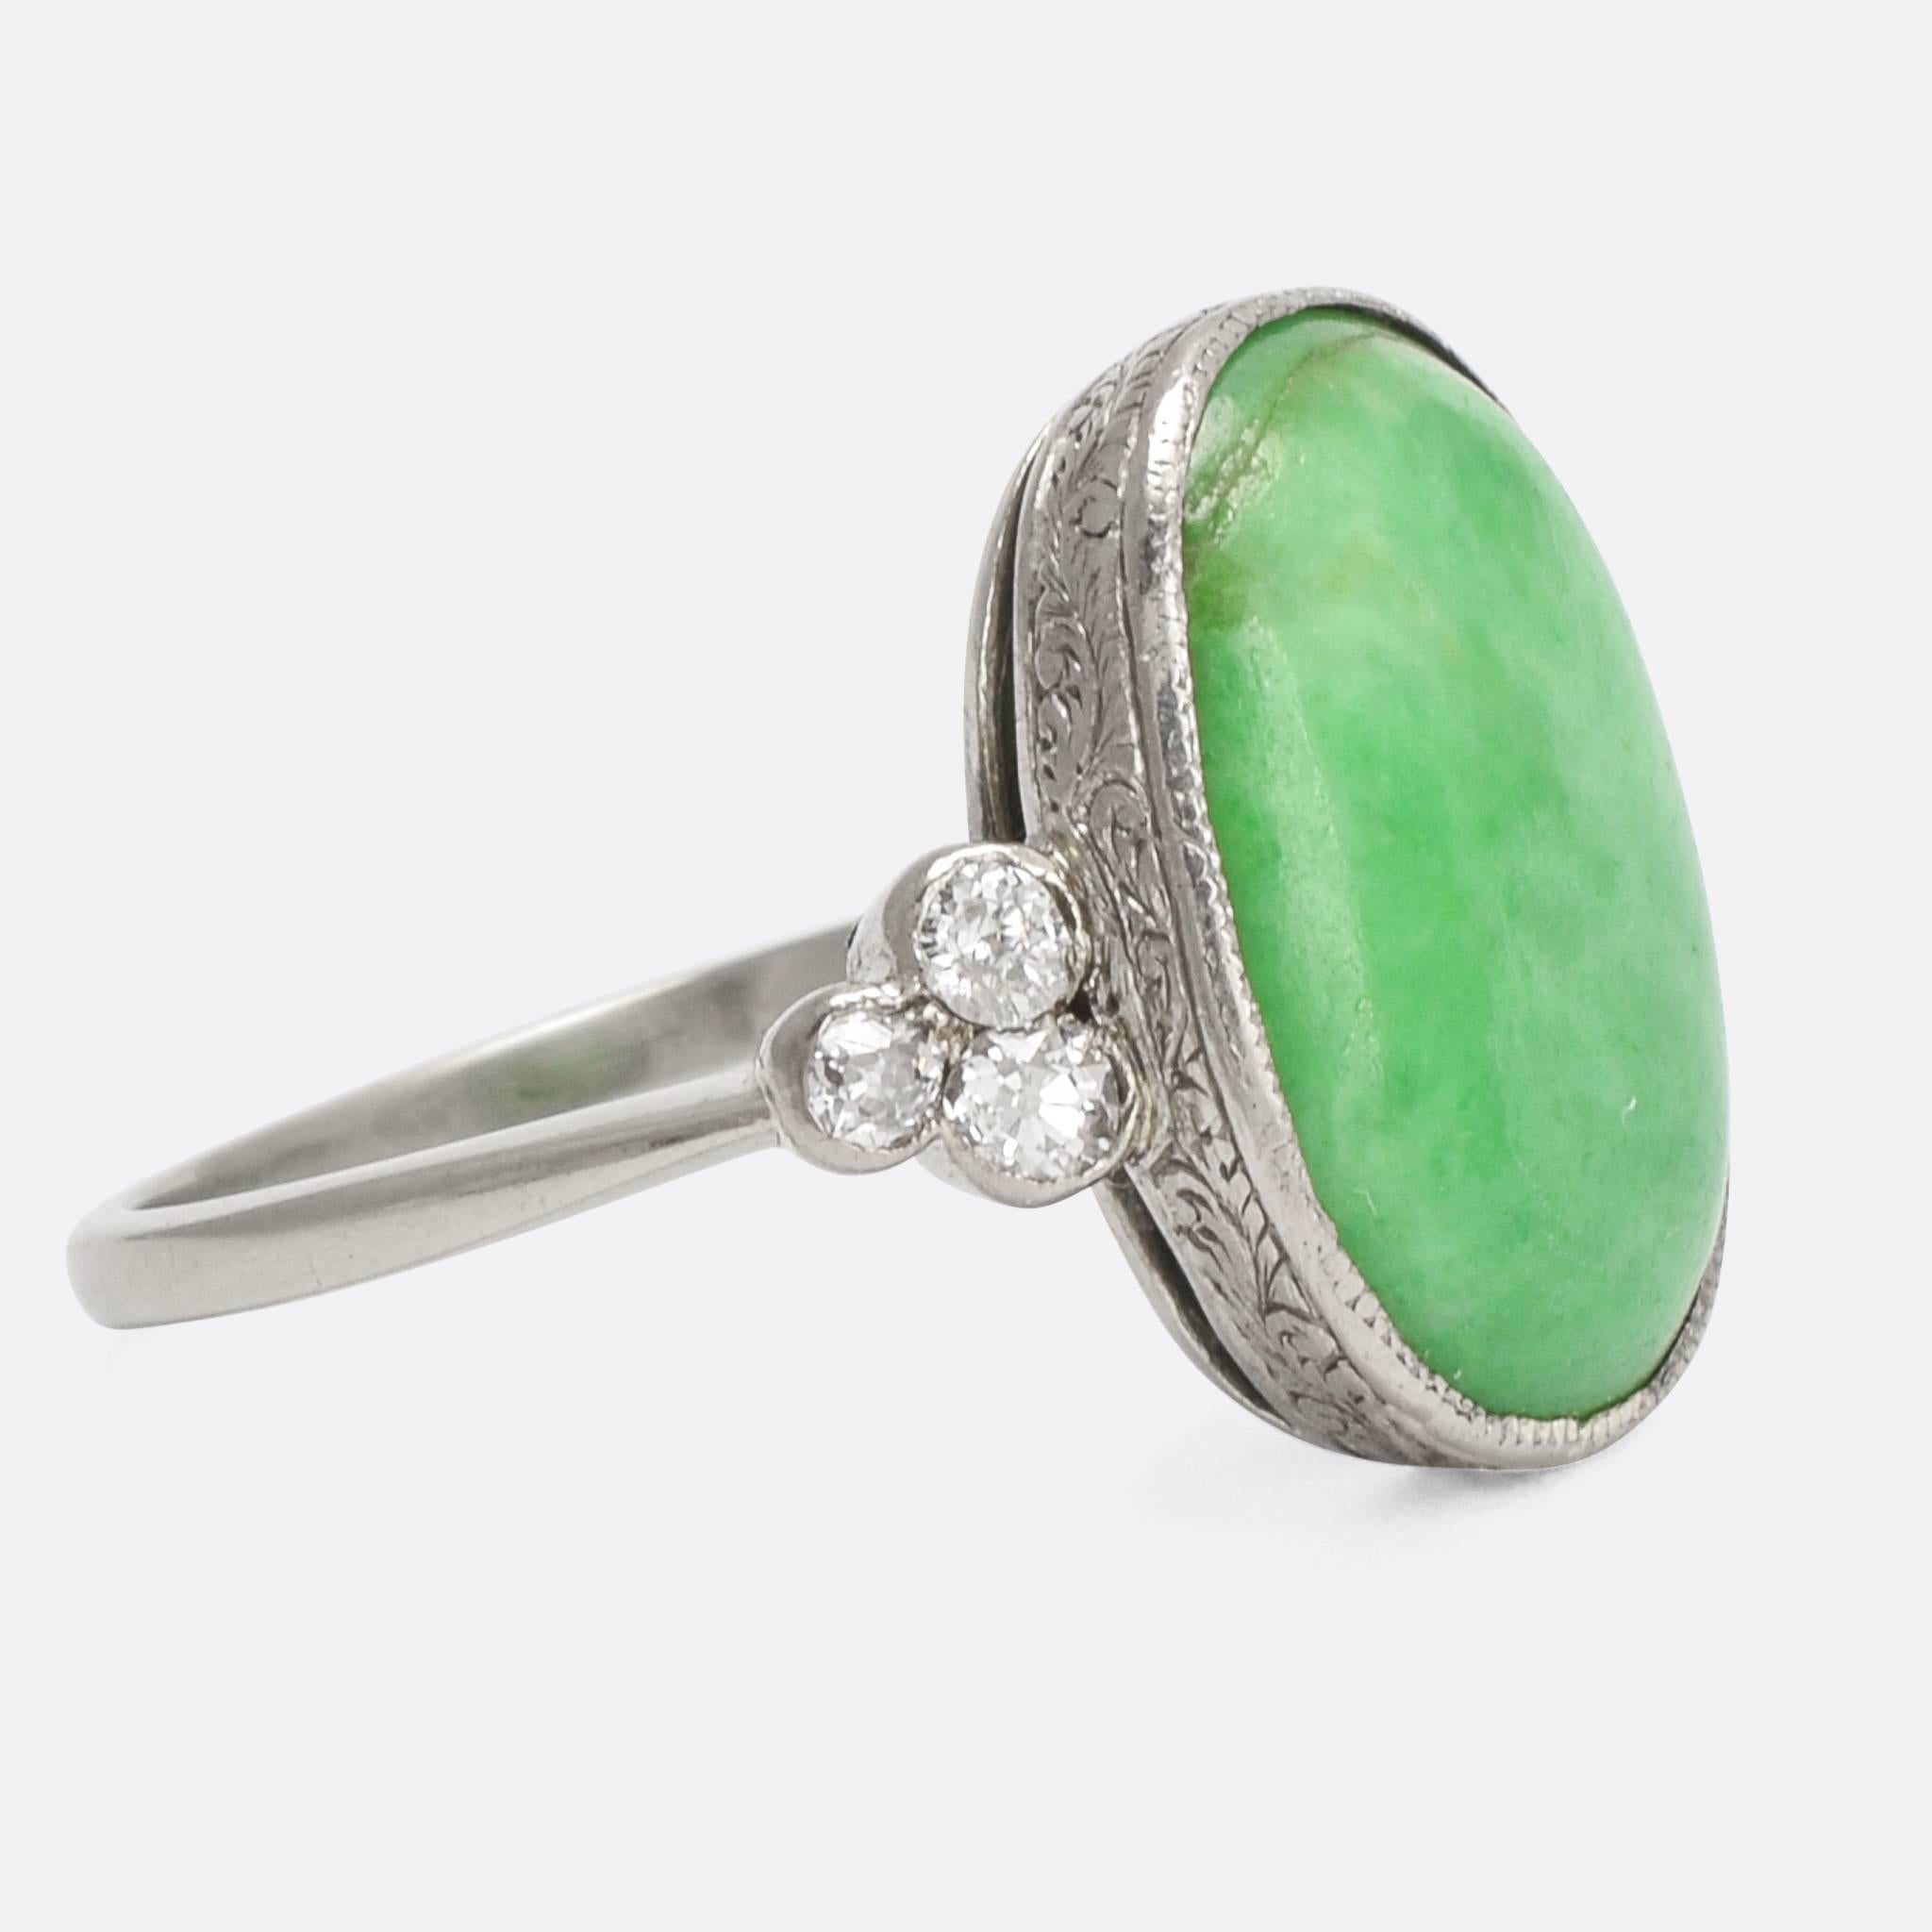 A superb antique Jade cocktail ring, dating from c.1910. Each shoulder is set with a three-stone cluster of old Euro diamonds in millegrain collet settings. Modelled in platinum throughout, with fine hand-chased detailing around the principal